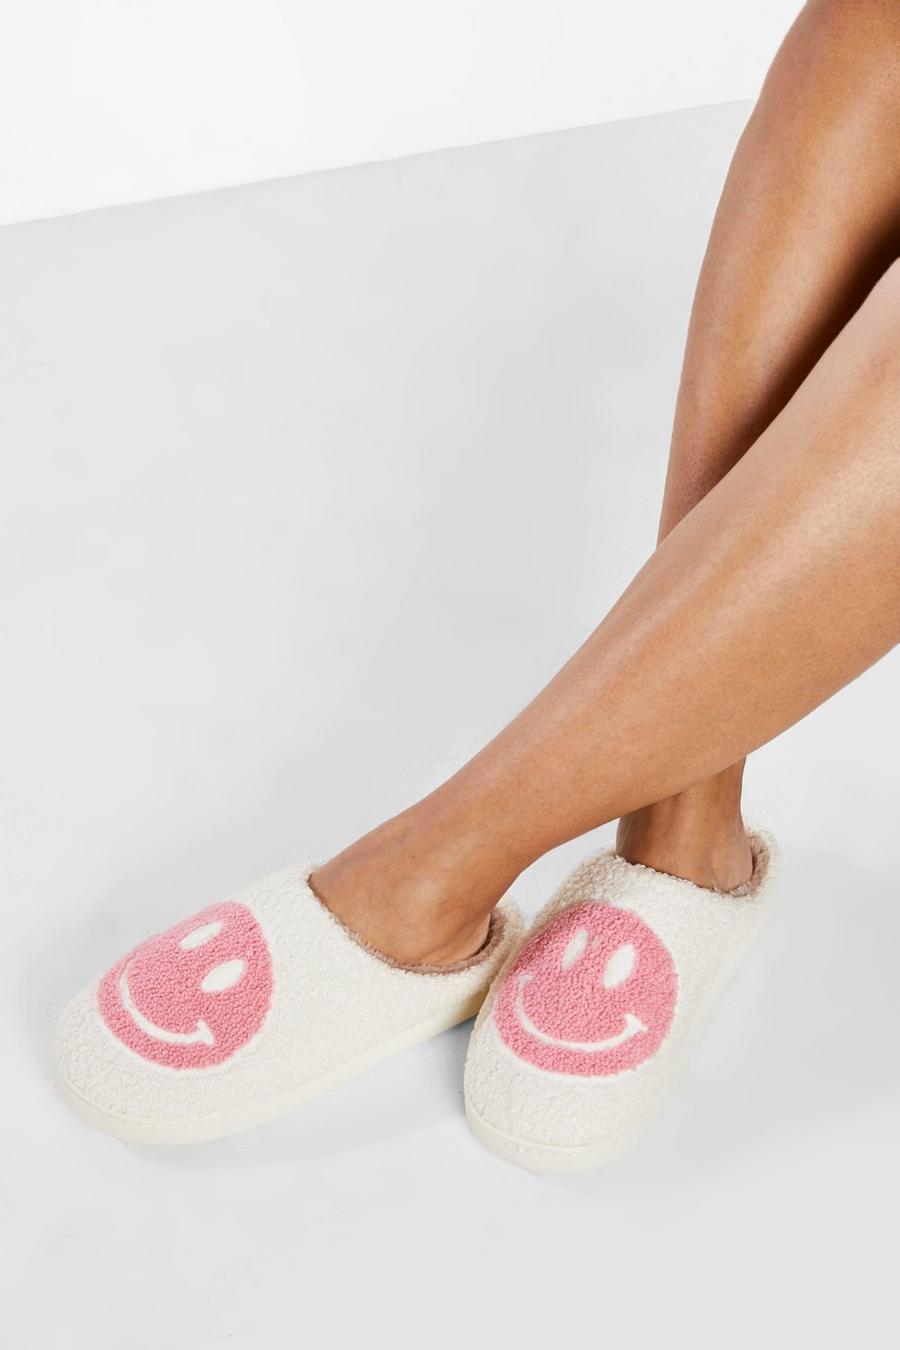 Chaussons smiley en polaire, Pink